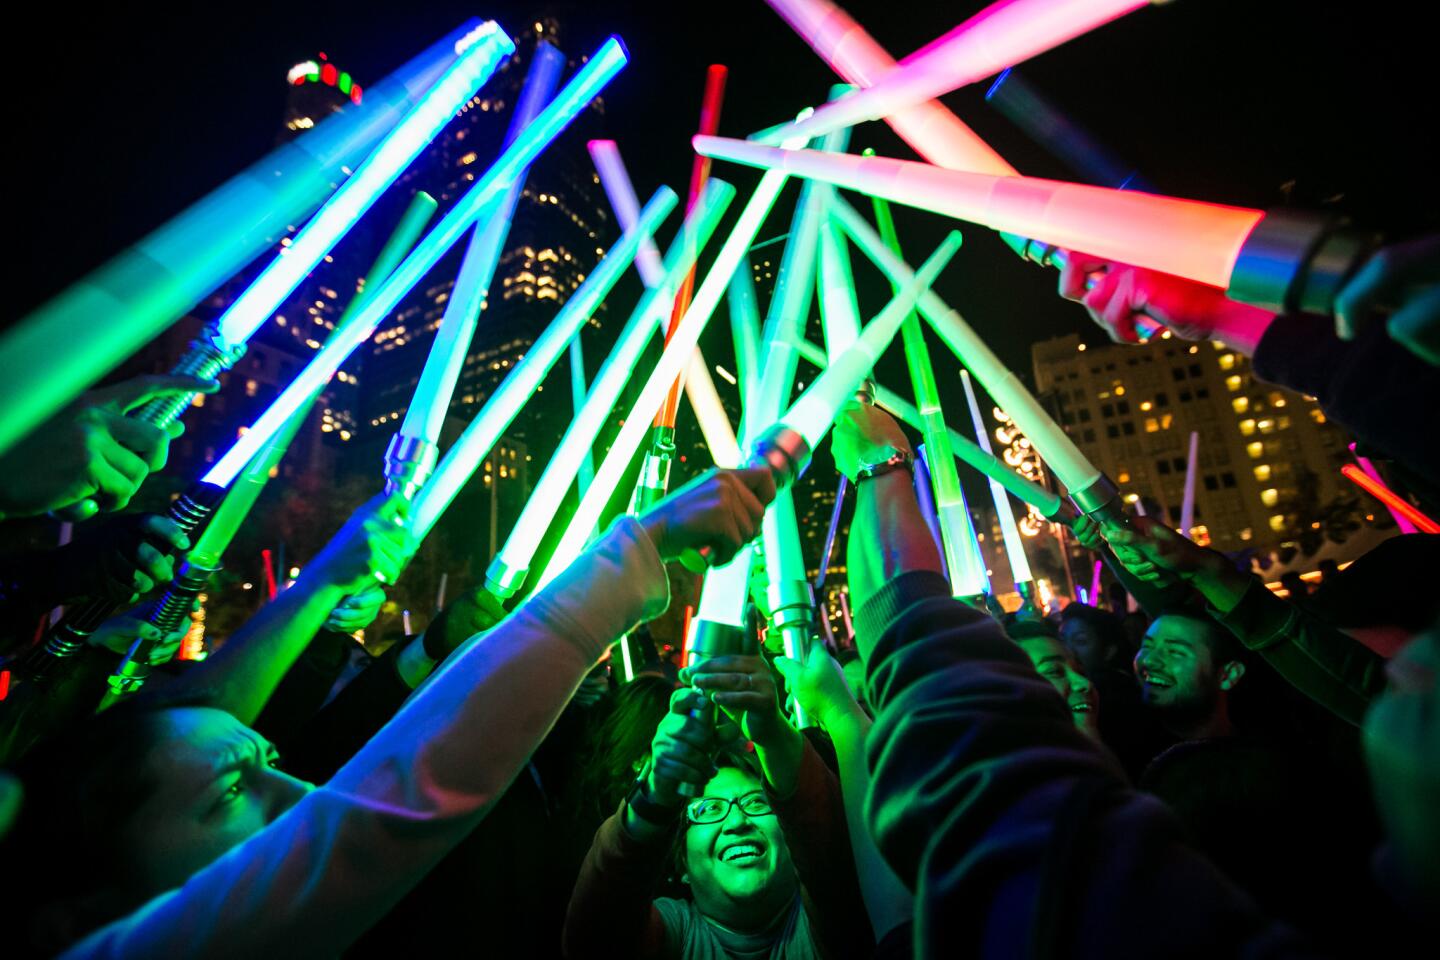 In the ultimate nocturnal showdown, thousands attend a lightsaber battle in downtown L.A.'s Pershing Square to celebrate the opening weekend of the new movie "Star Wars: The Force Awakens."